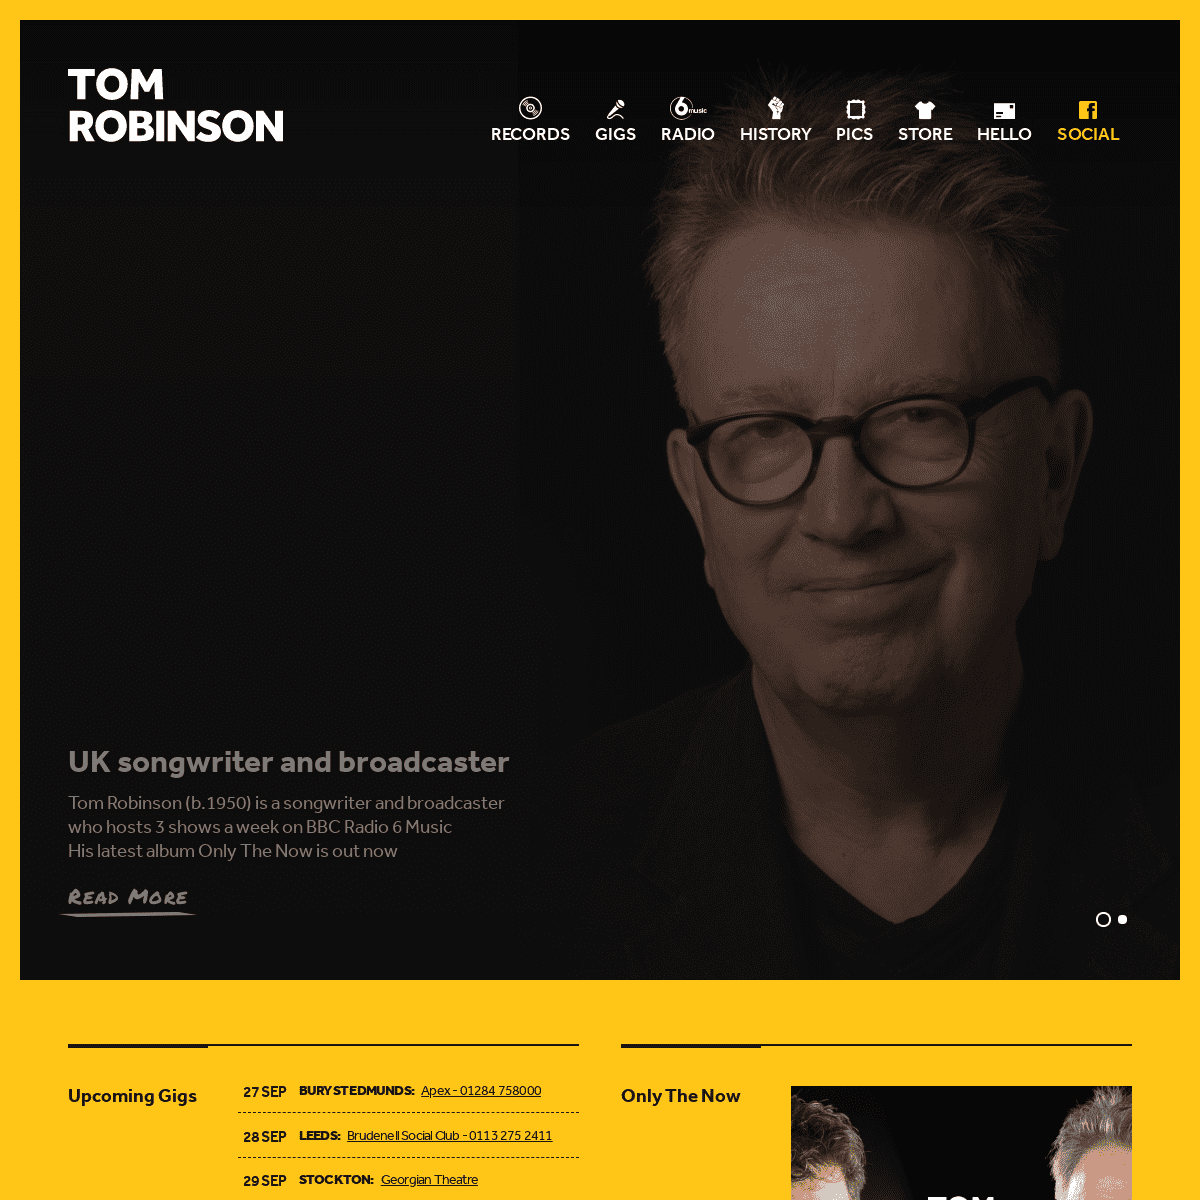 A complete backup of https://tomrobinson.com